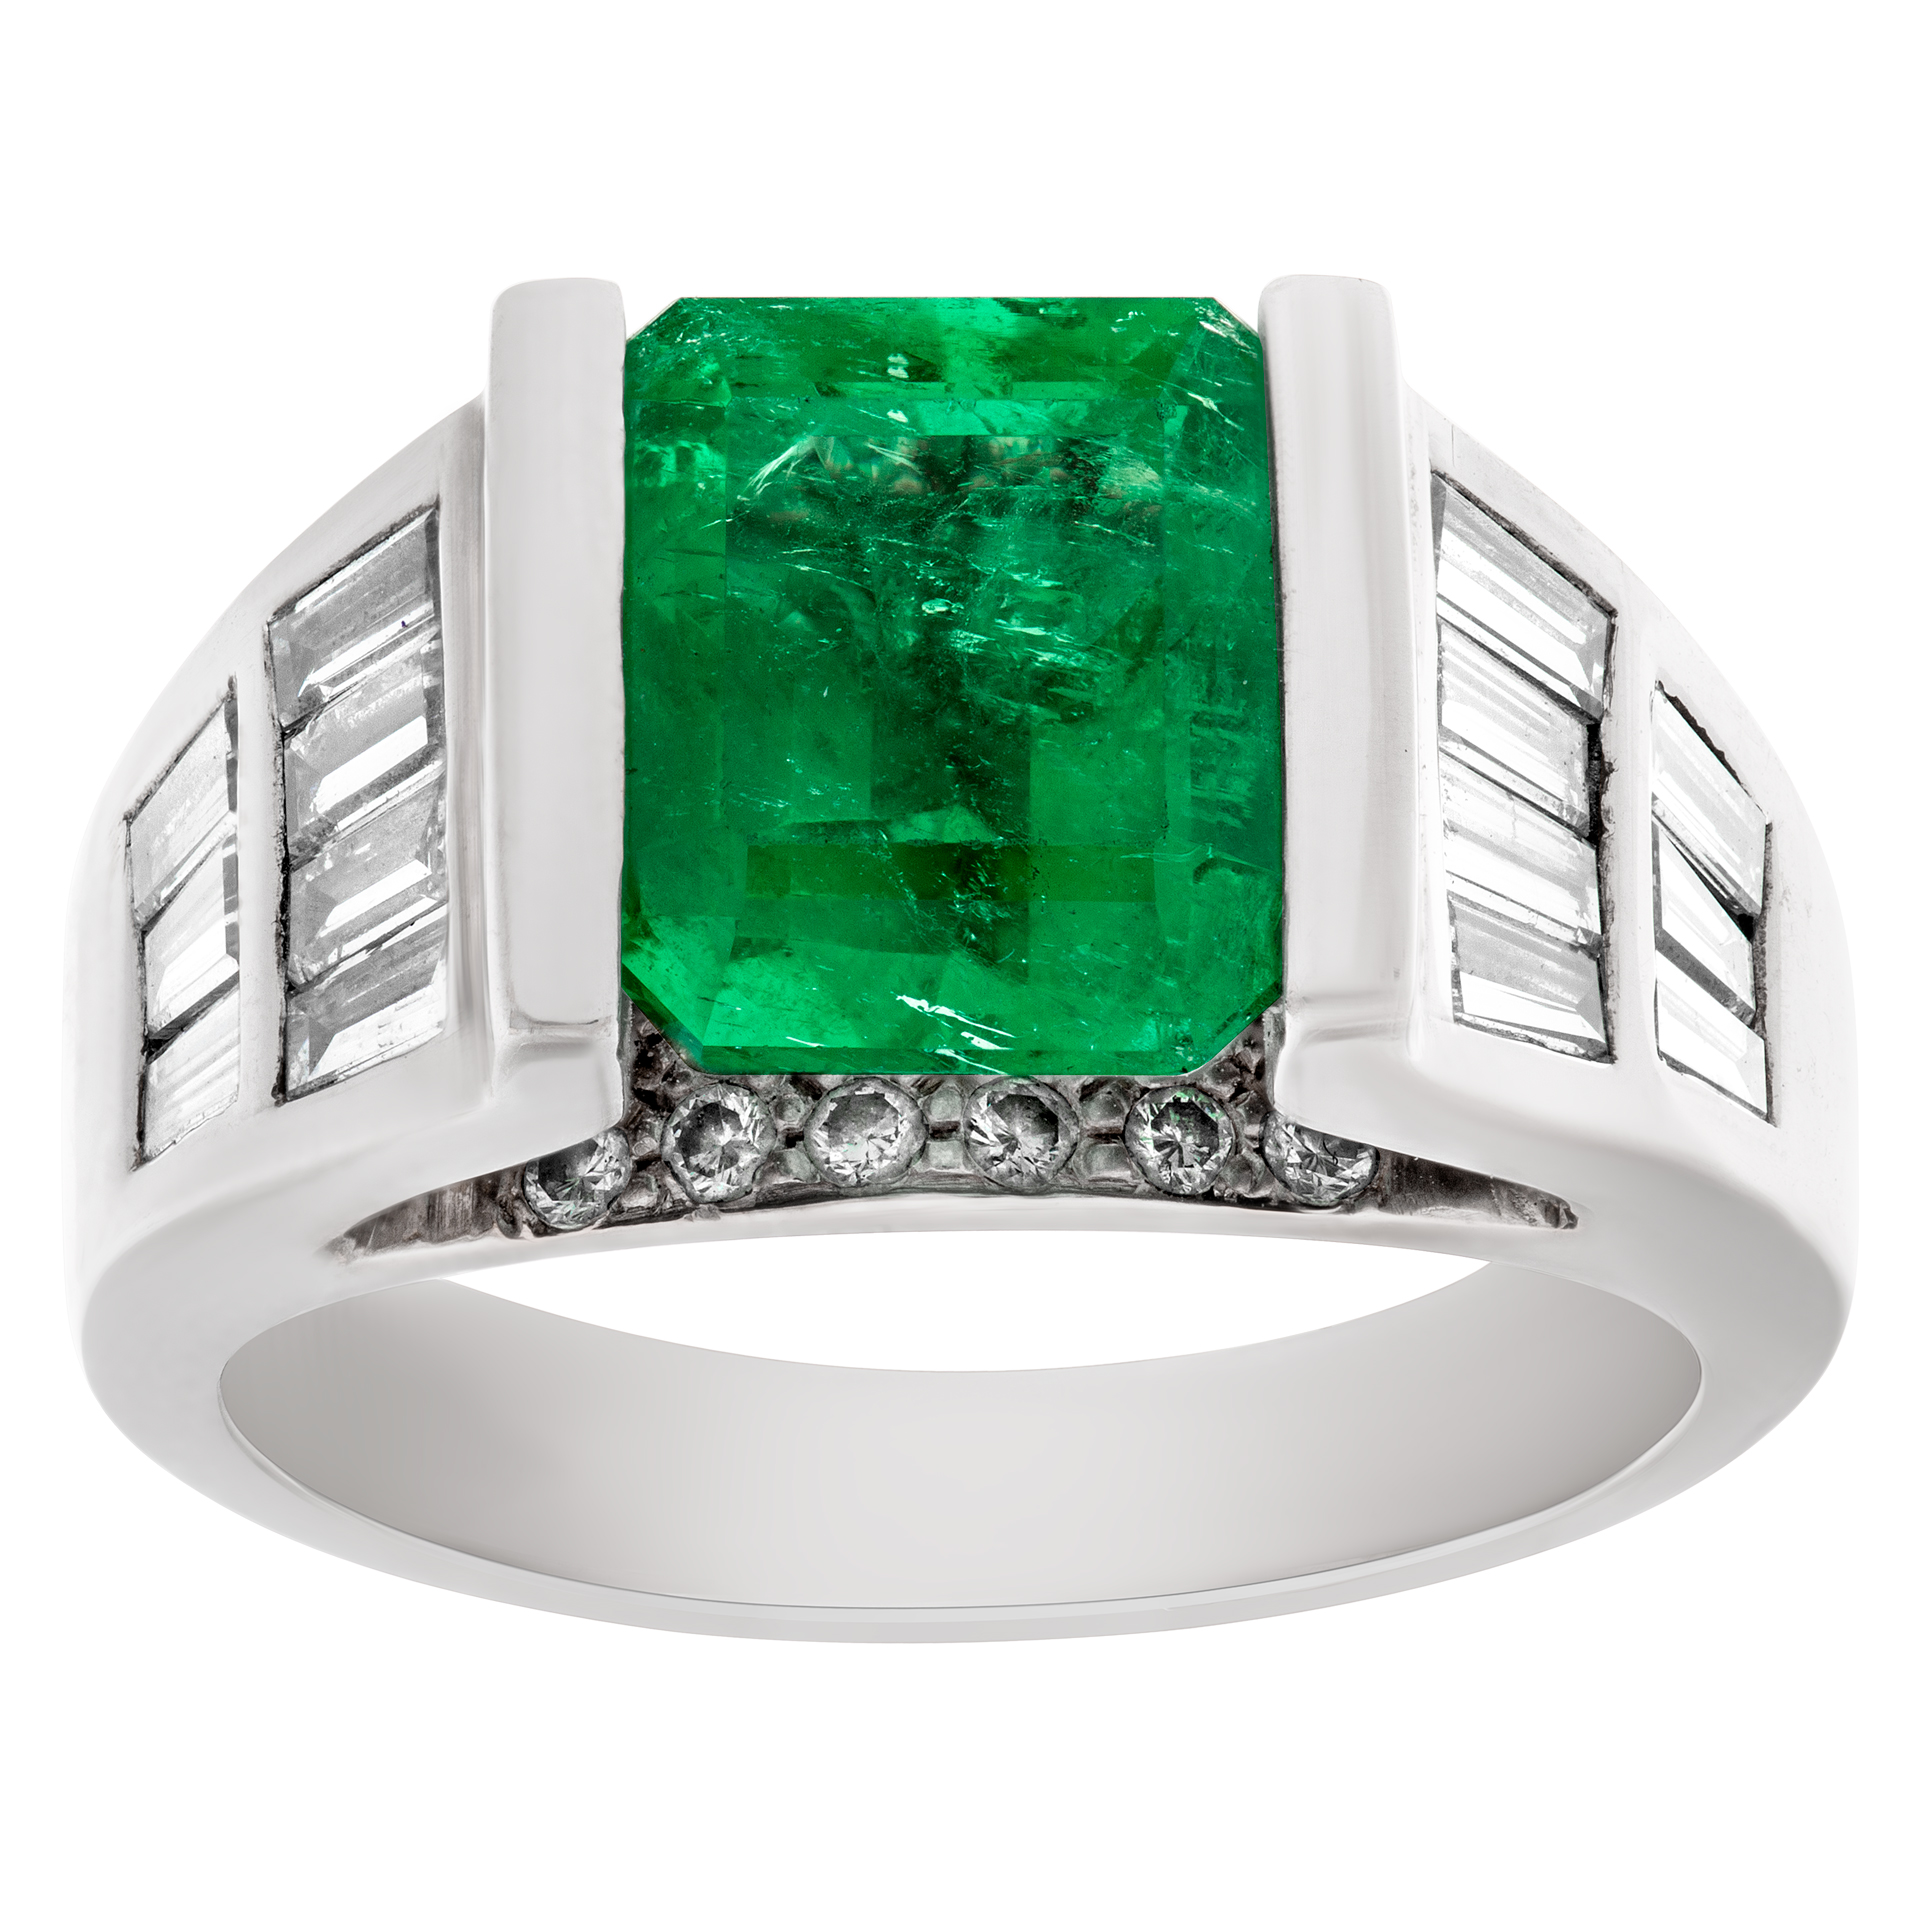 Emerald ring in 14k white gold. 3.16 Carat emerald, 1.05 Cts in diamonds.